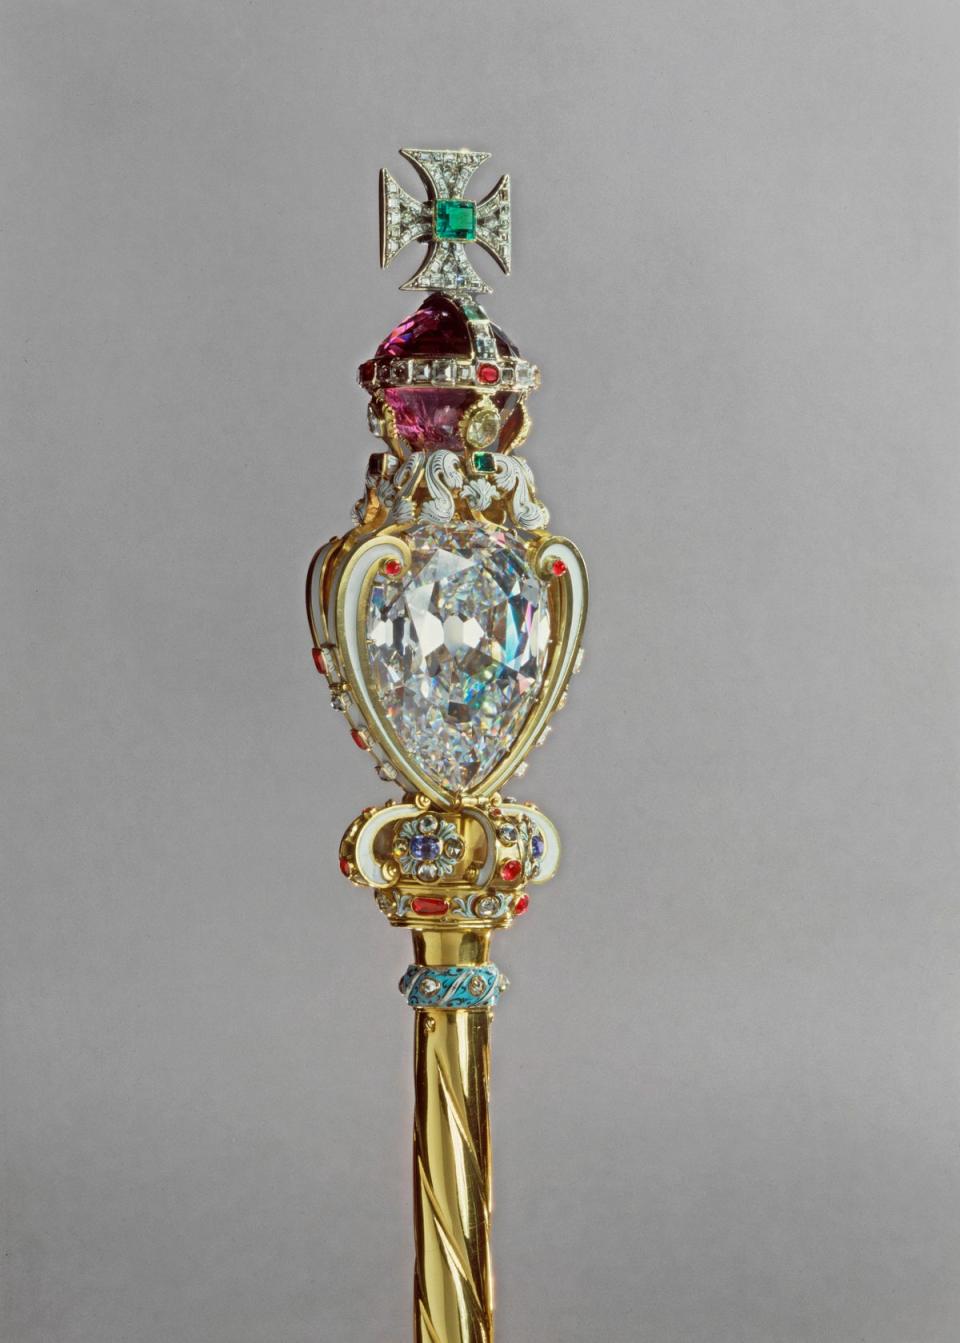 The Sovereign’s Sceptre with Cross which will feature during the Coronation of King Charles III at Westminster Abbey (PA)